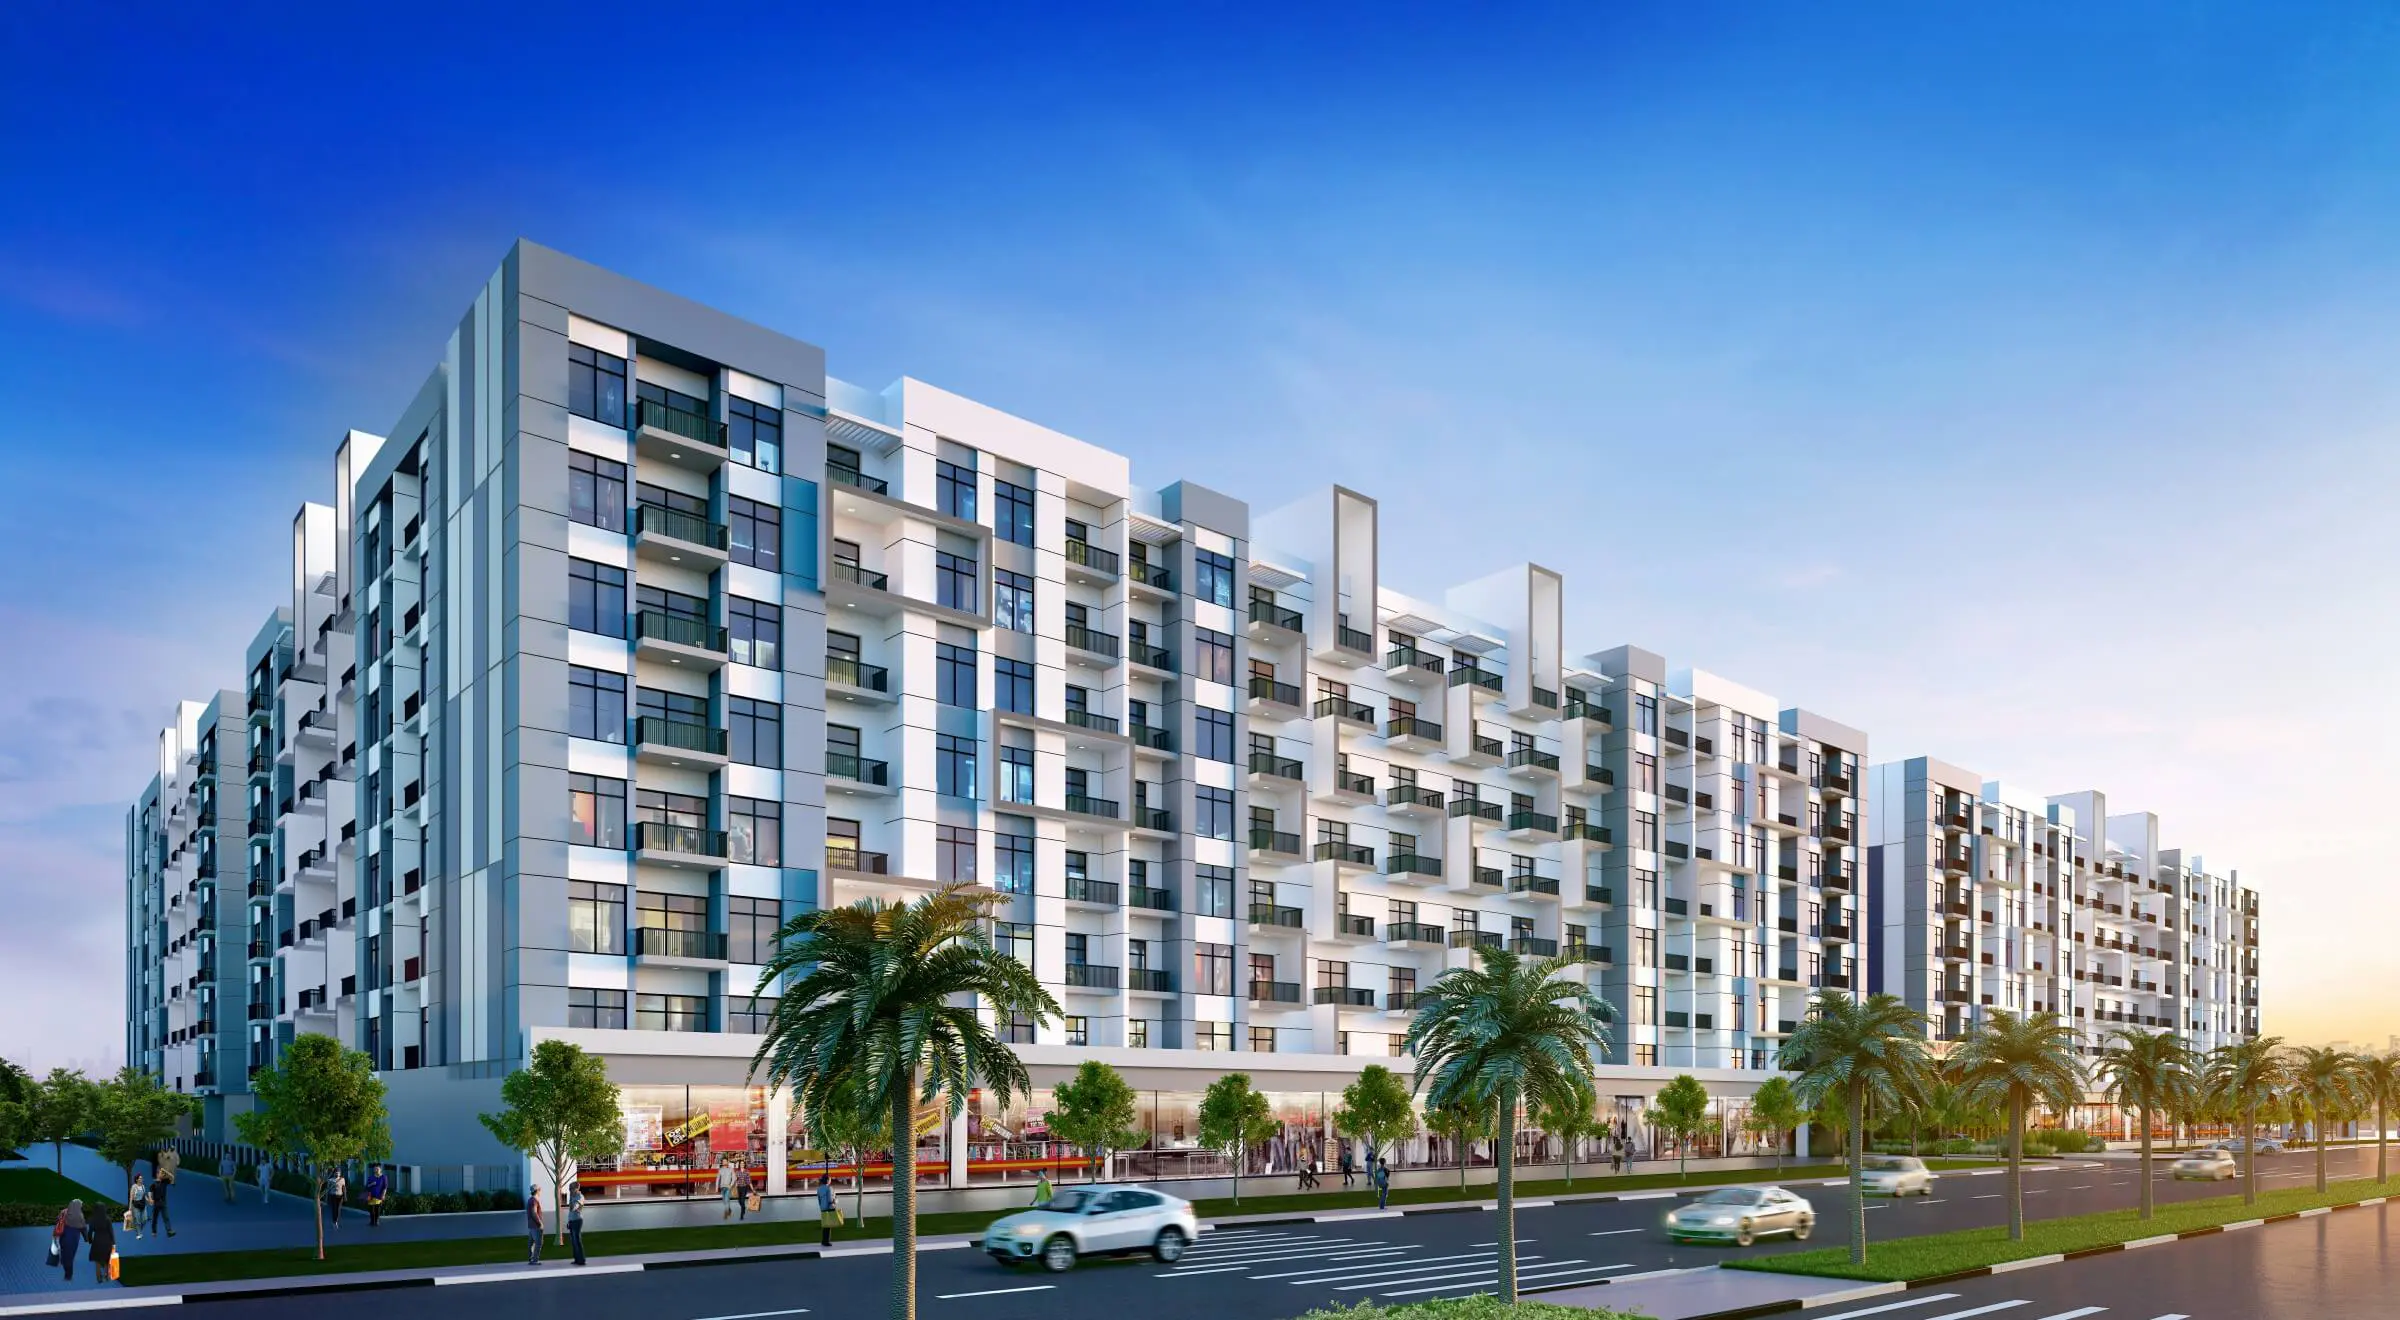 Lawnz Apartments for Sale & Rent in International City phase 1